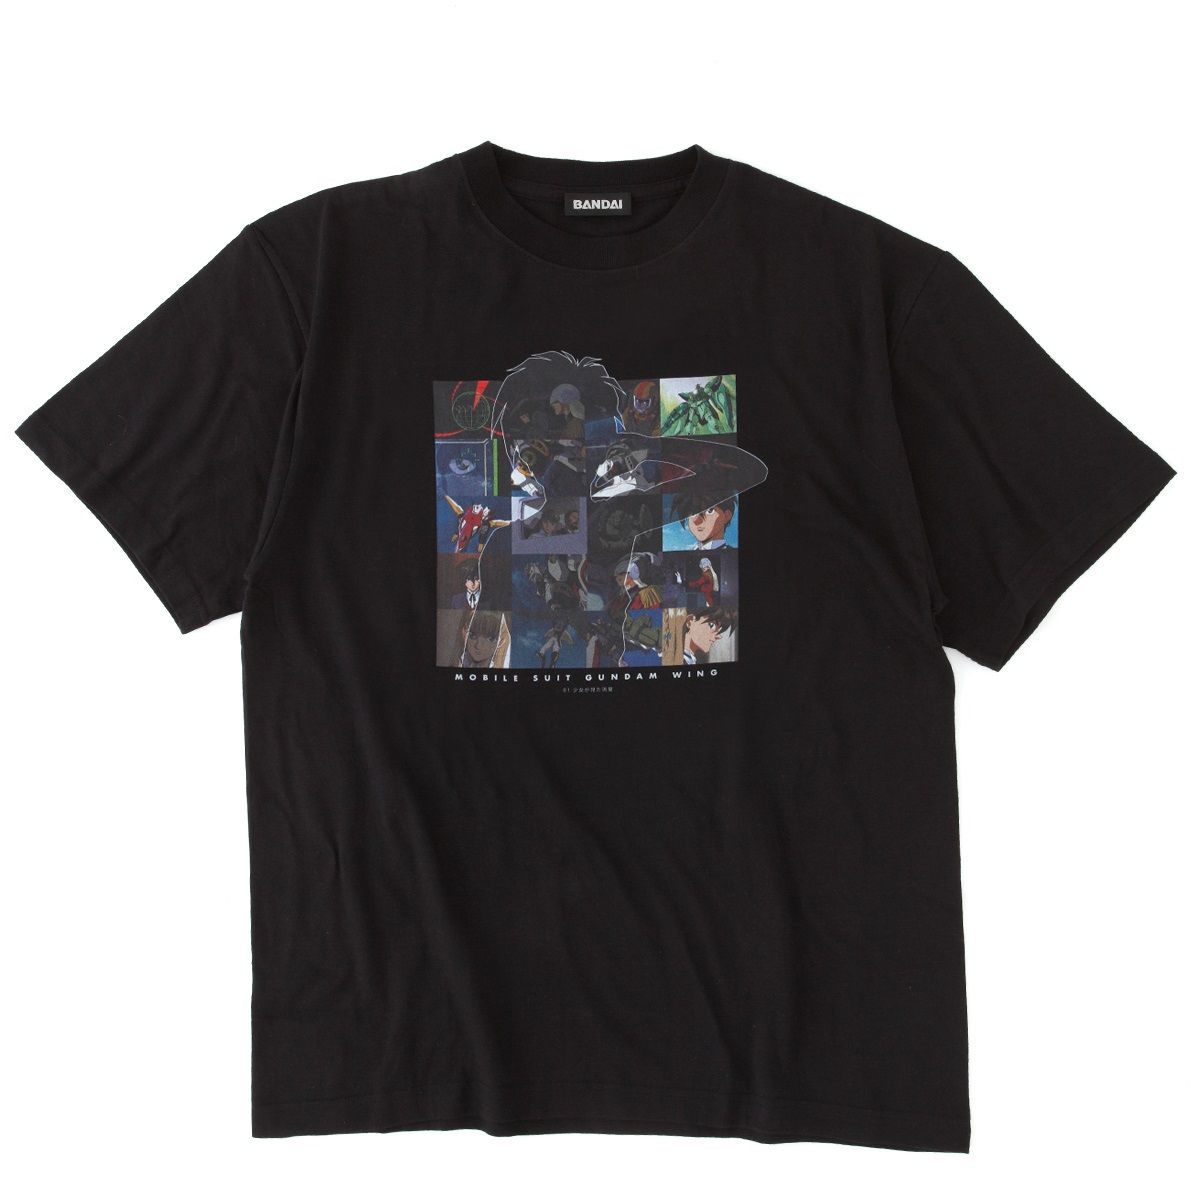 The Shooting Star She Saw T-shirt—Mobile Suit Gundam Wing